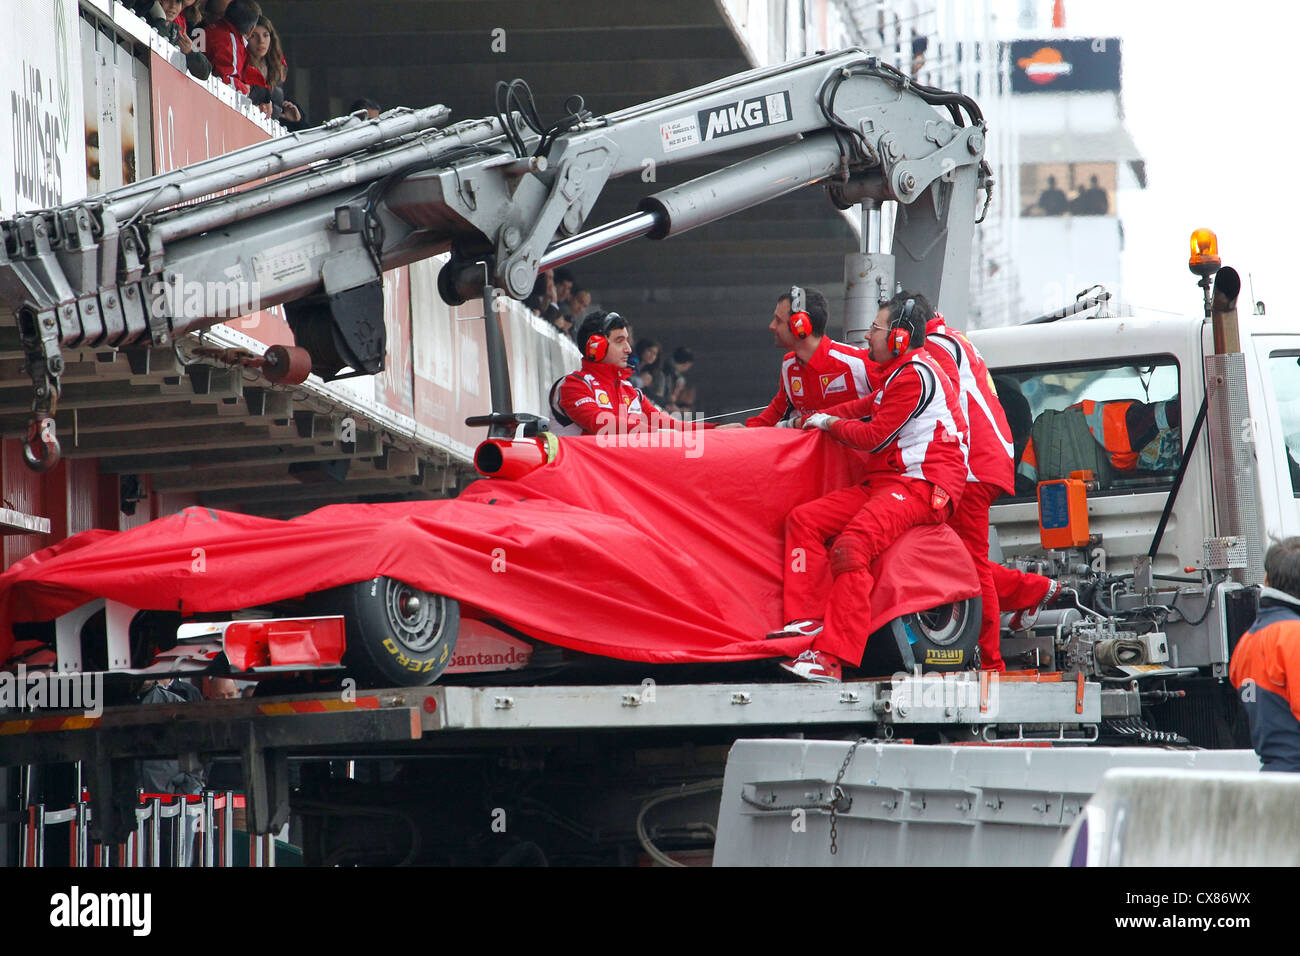 Felippe Massa's Ferrari being lifted into the pit lane after crashing out during Formula One testing at Montmelo, Spain Stock Photo